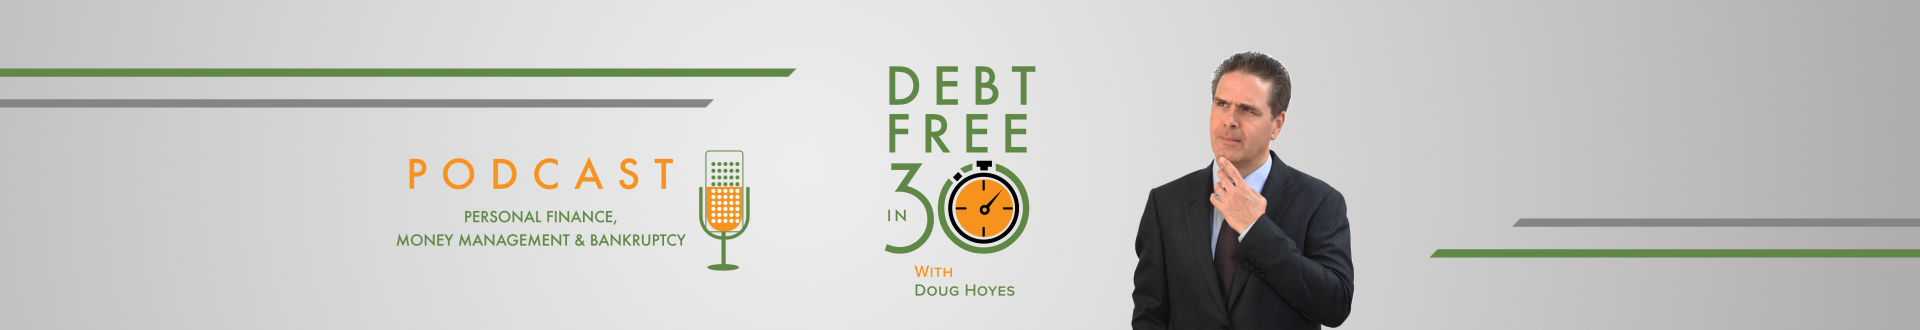 Debt Free in 30 Podcast Archive - Page 34